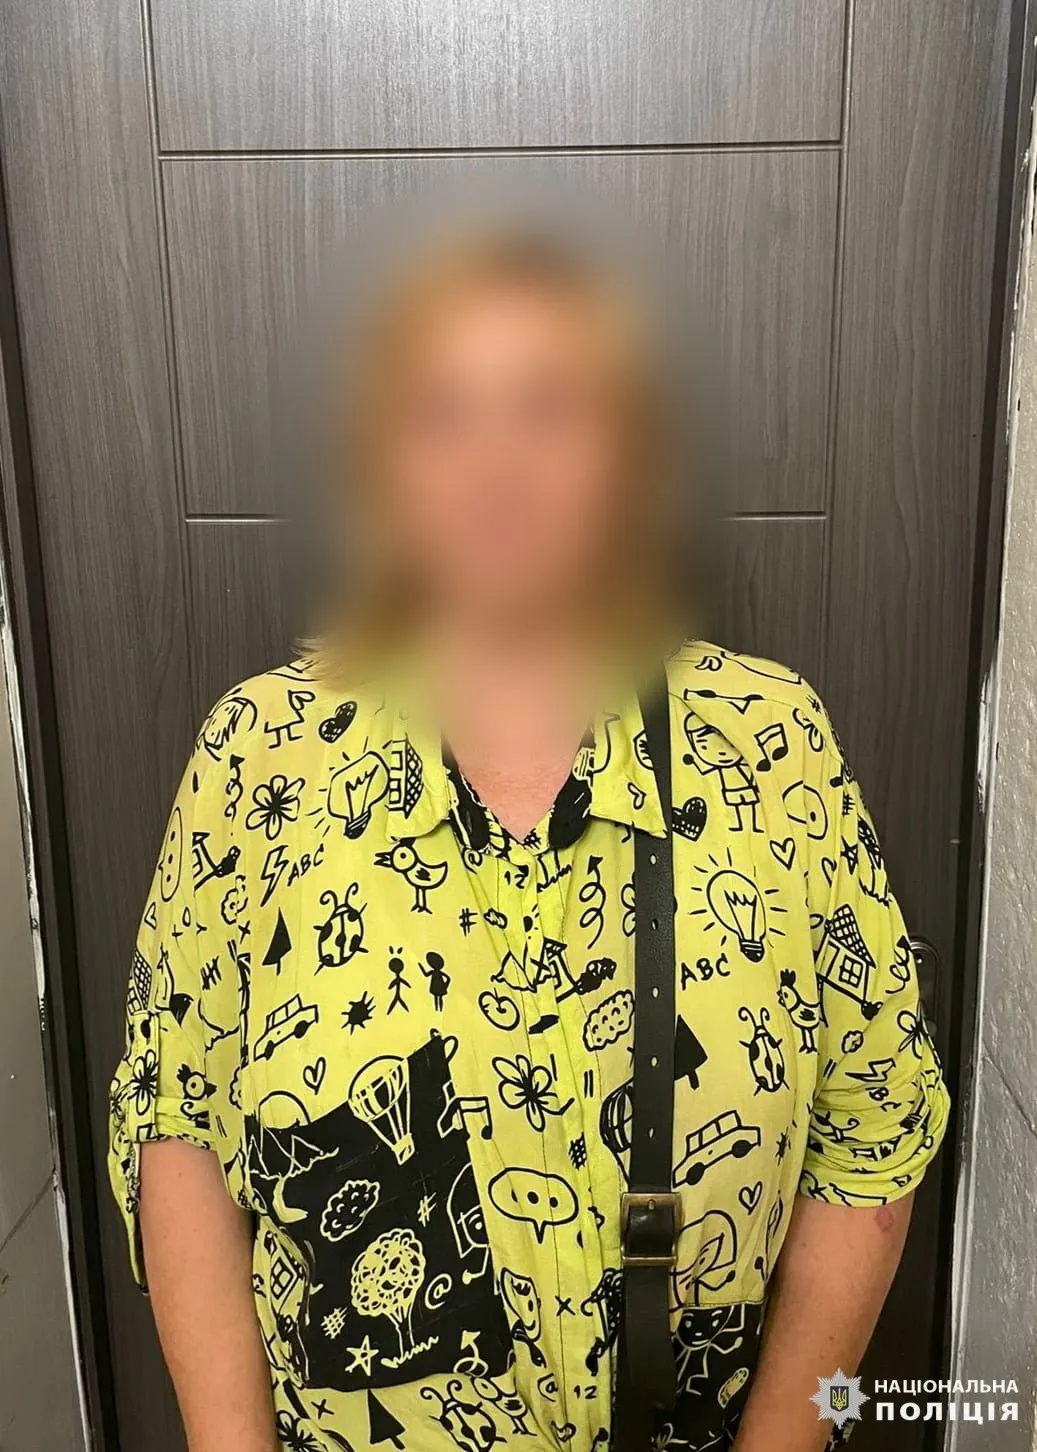 In Kharkiv, a woman illegally received her deceased mother's pension for 2 years